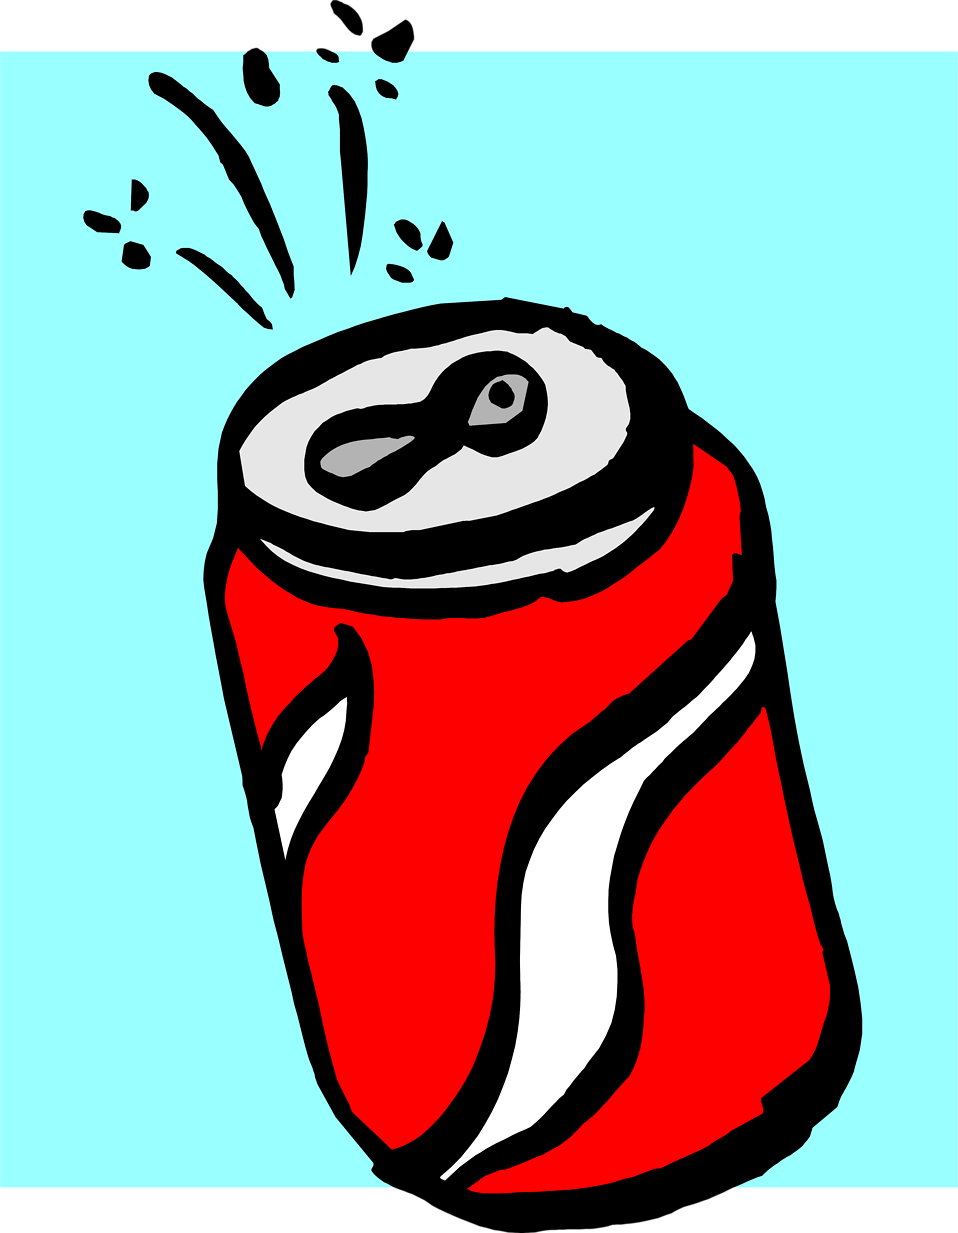 Soda Can Illustration - ClipArt Best